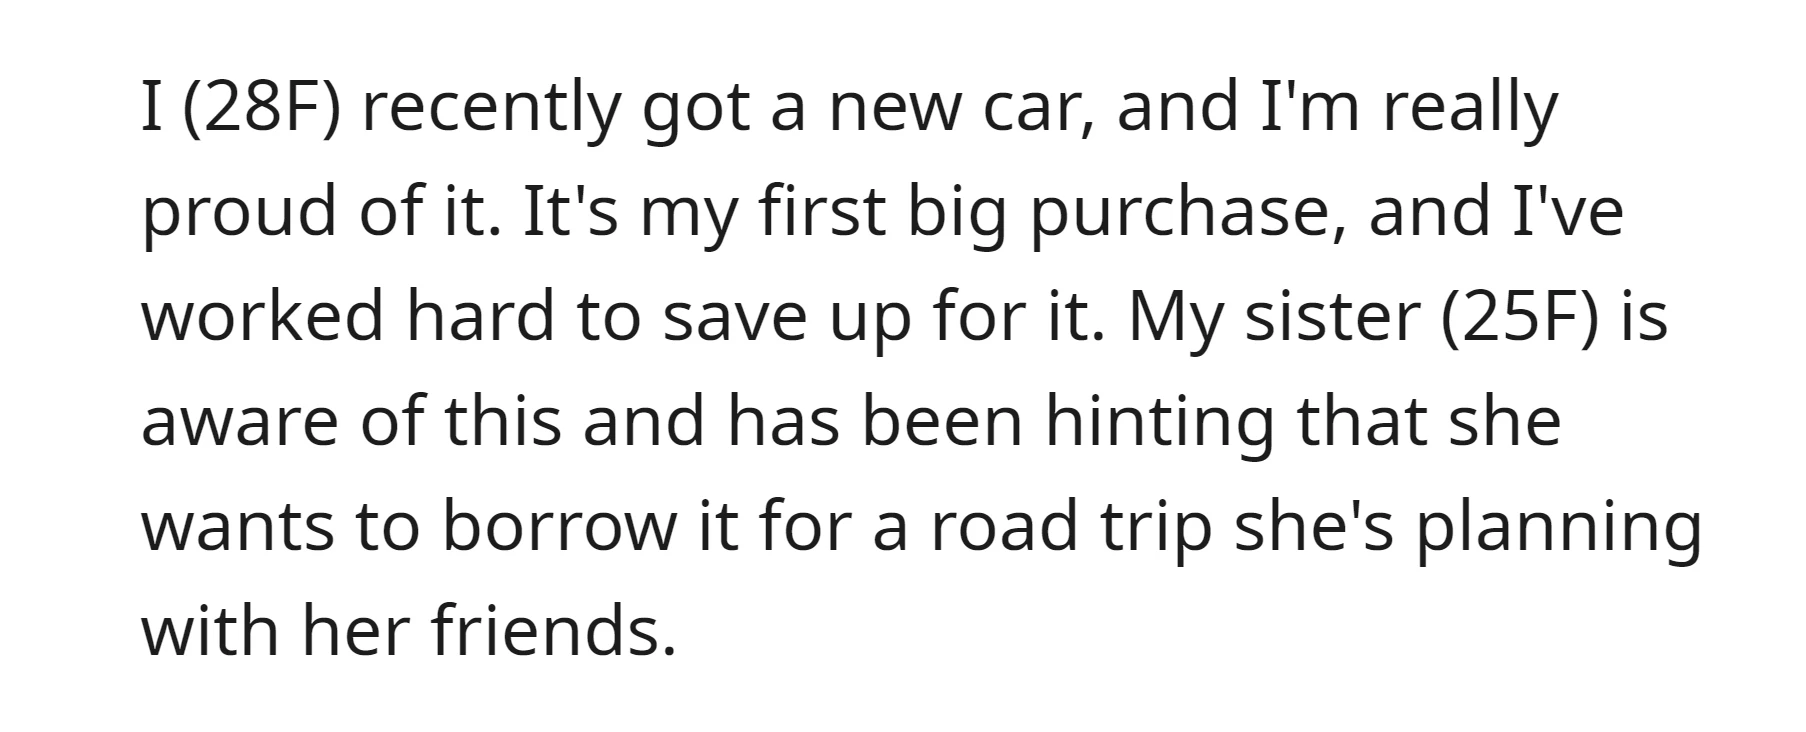 The OP recently bought a car and her sister wants to borrow it